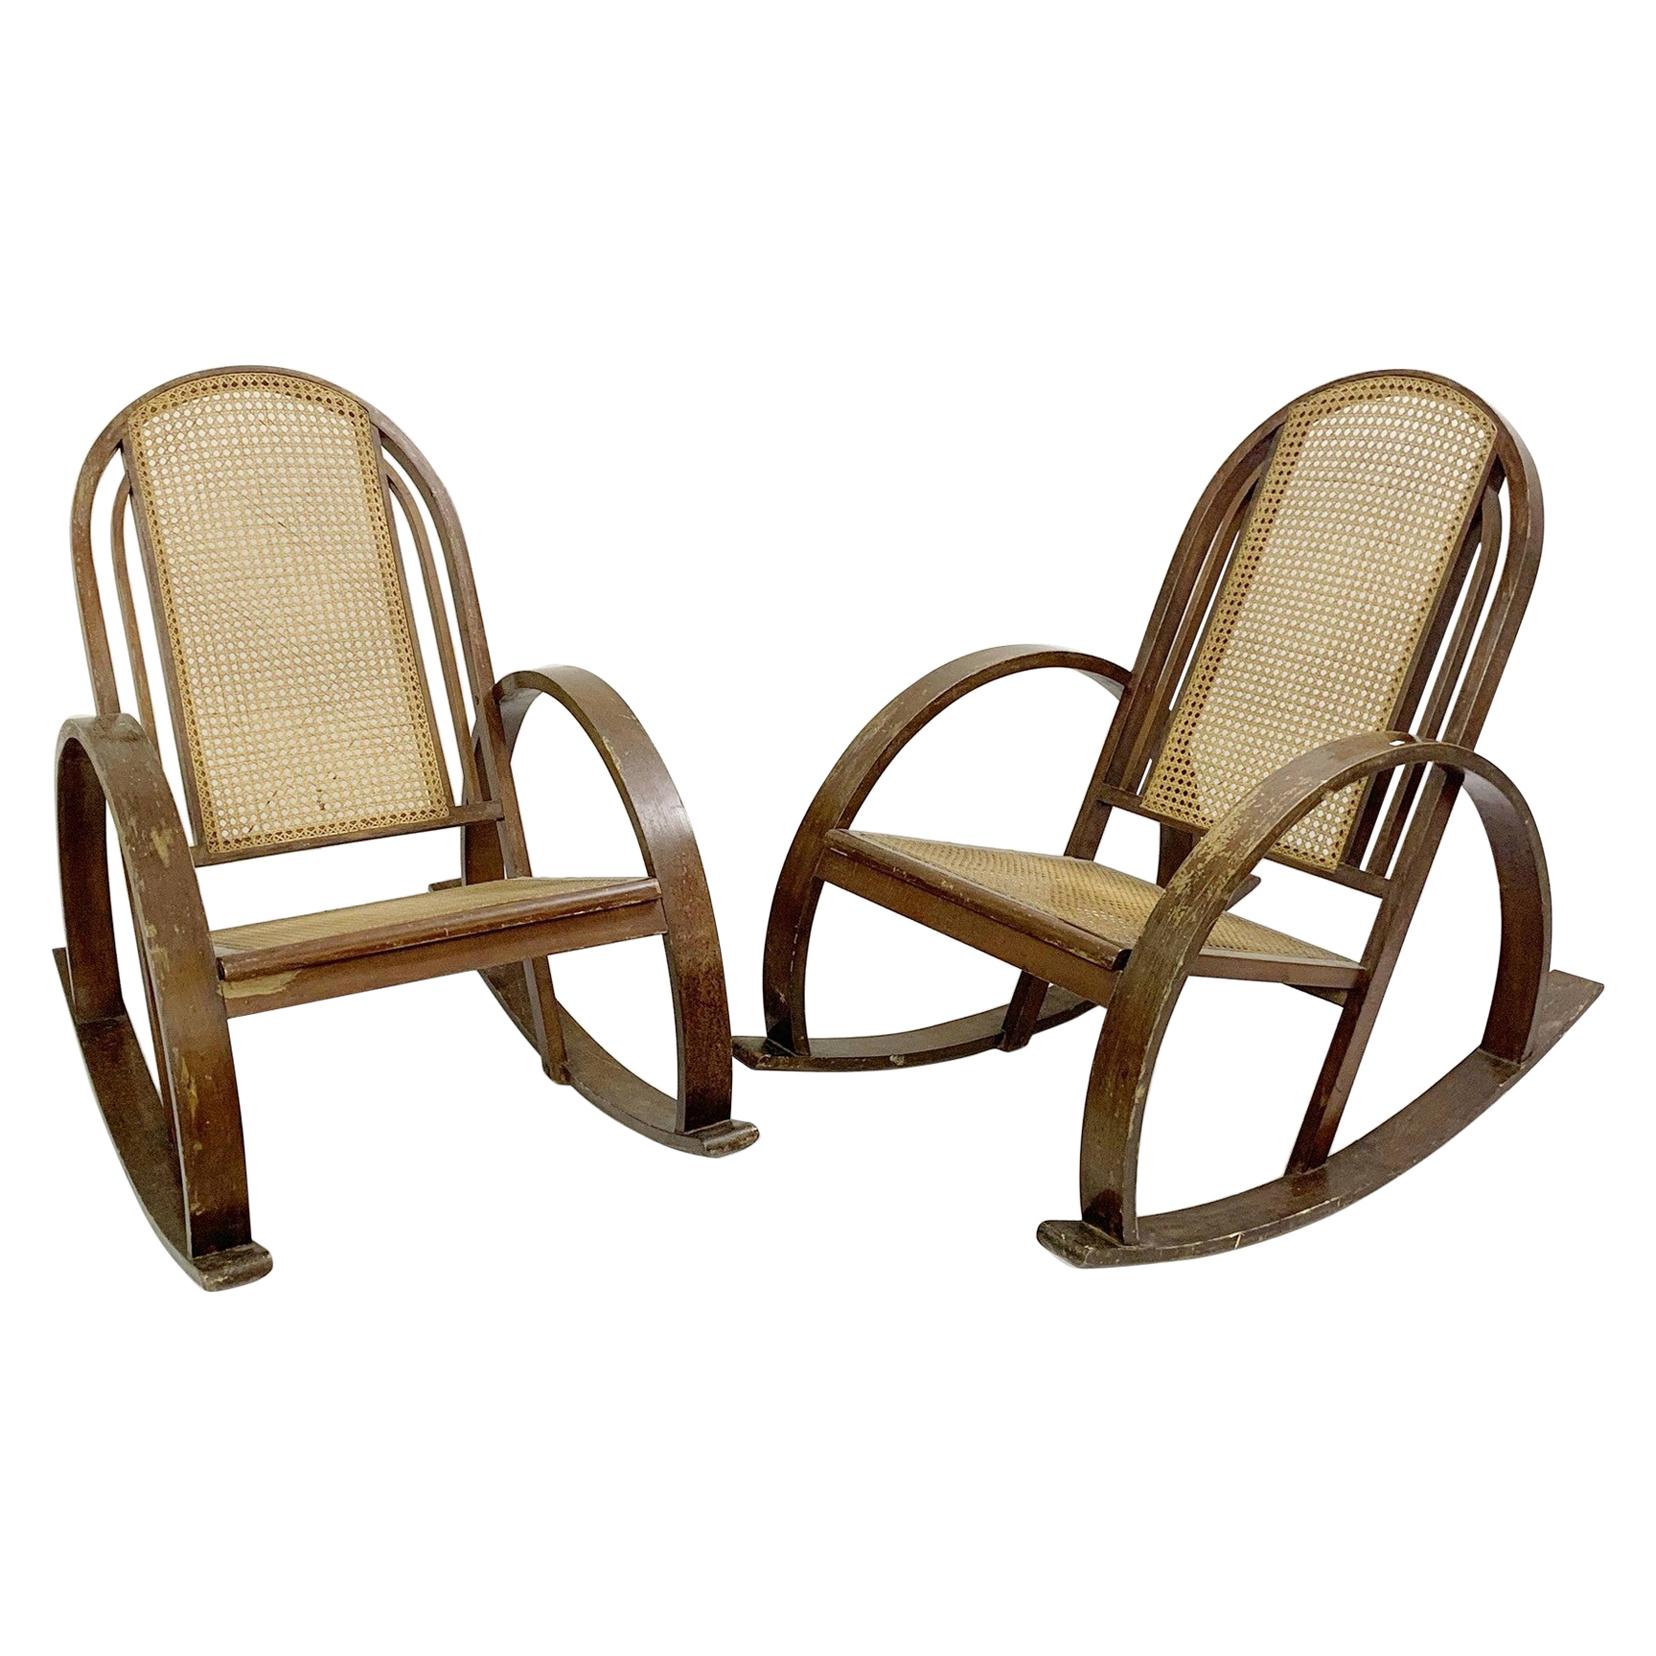 Pair of Bentwood Rocking Chairs with Sitting and Back in Caning